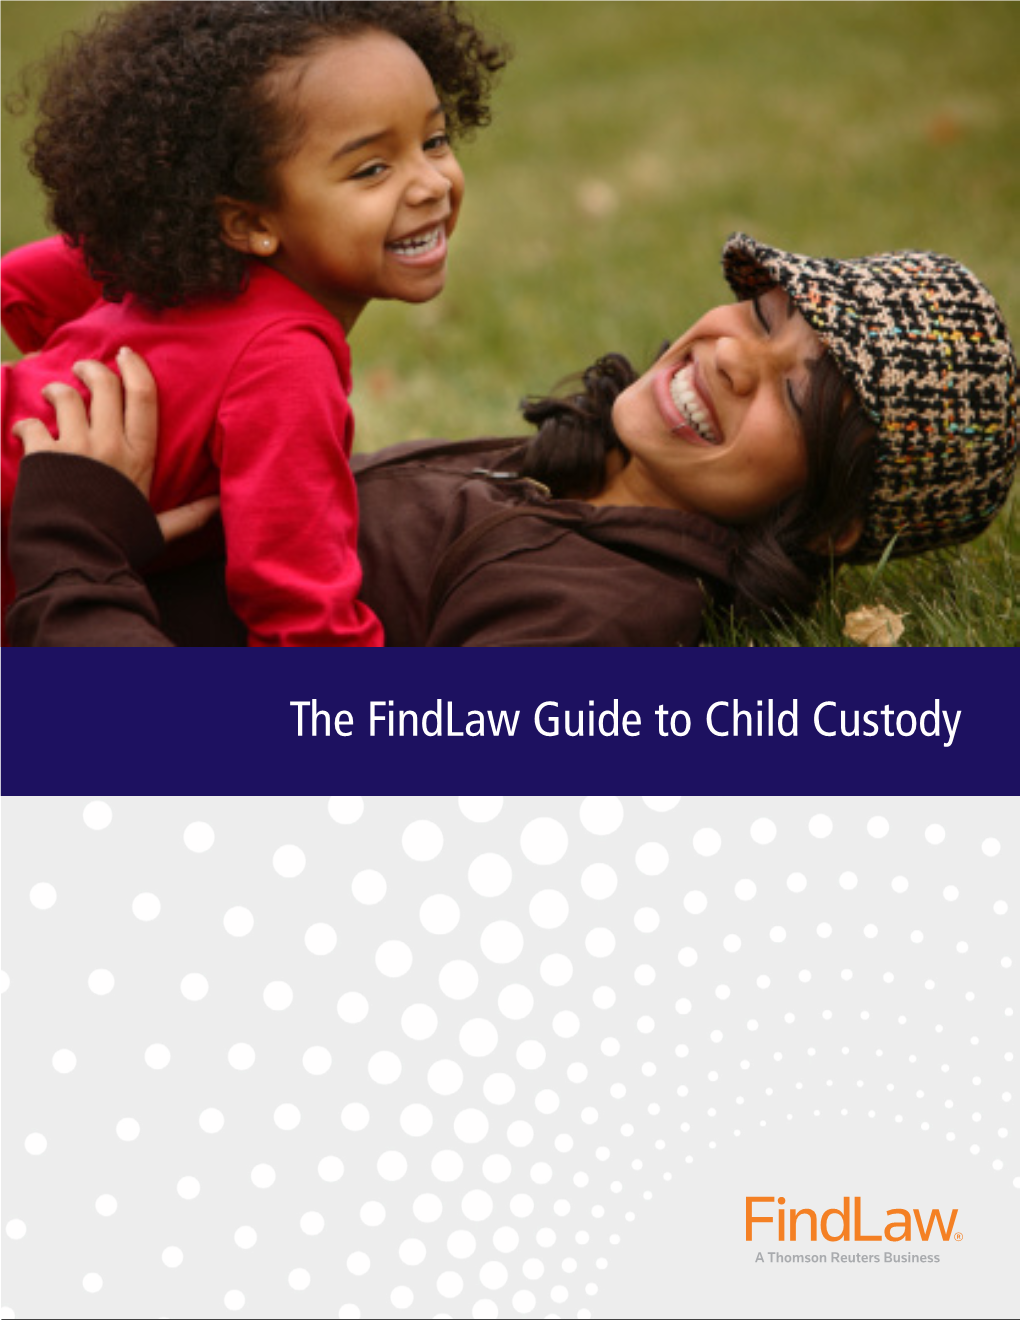 The Findlaw Guide to Child Custody